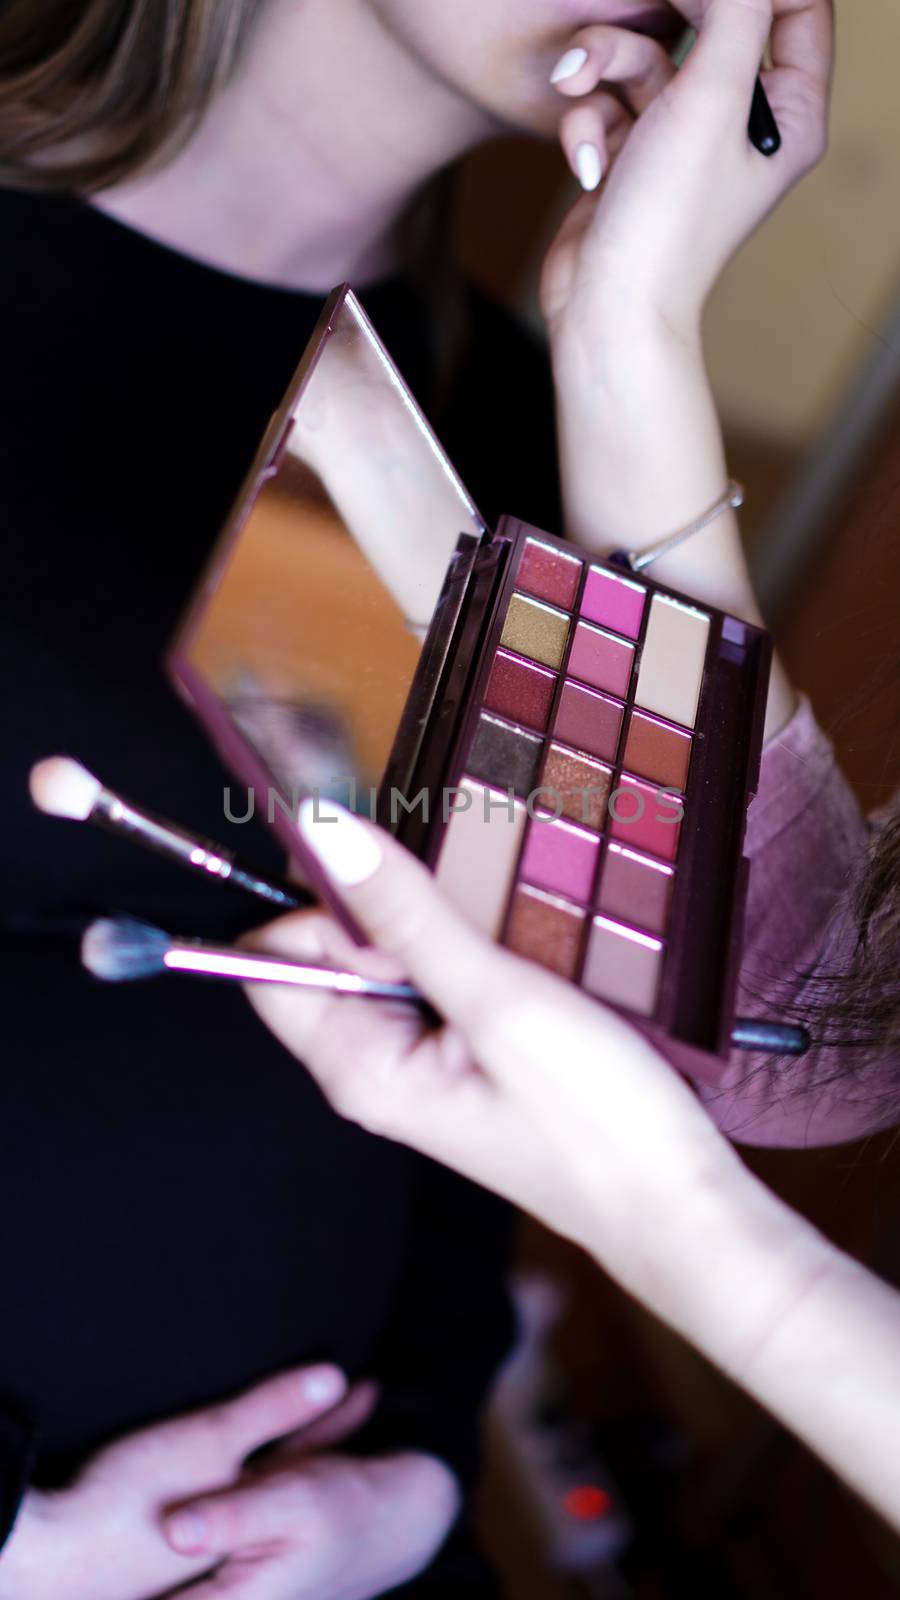 Hand use palette colorful and brush set makeup, beauty and fashion by natali_brill